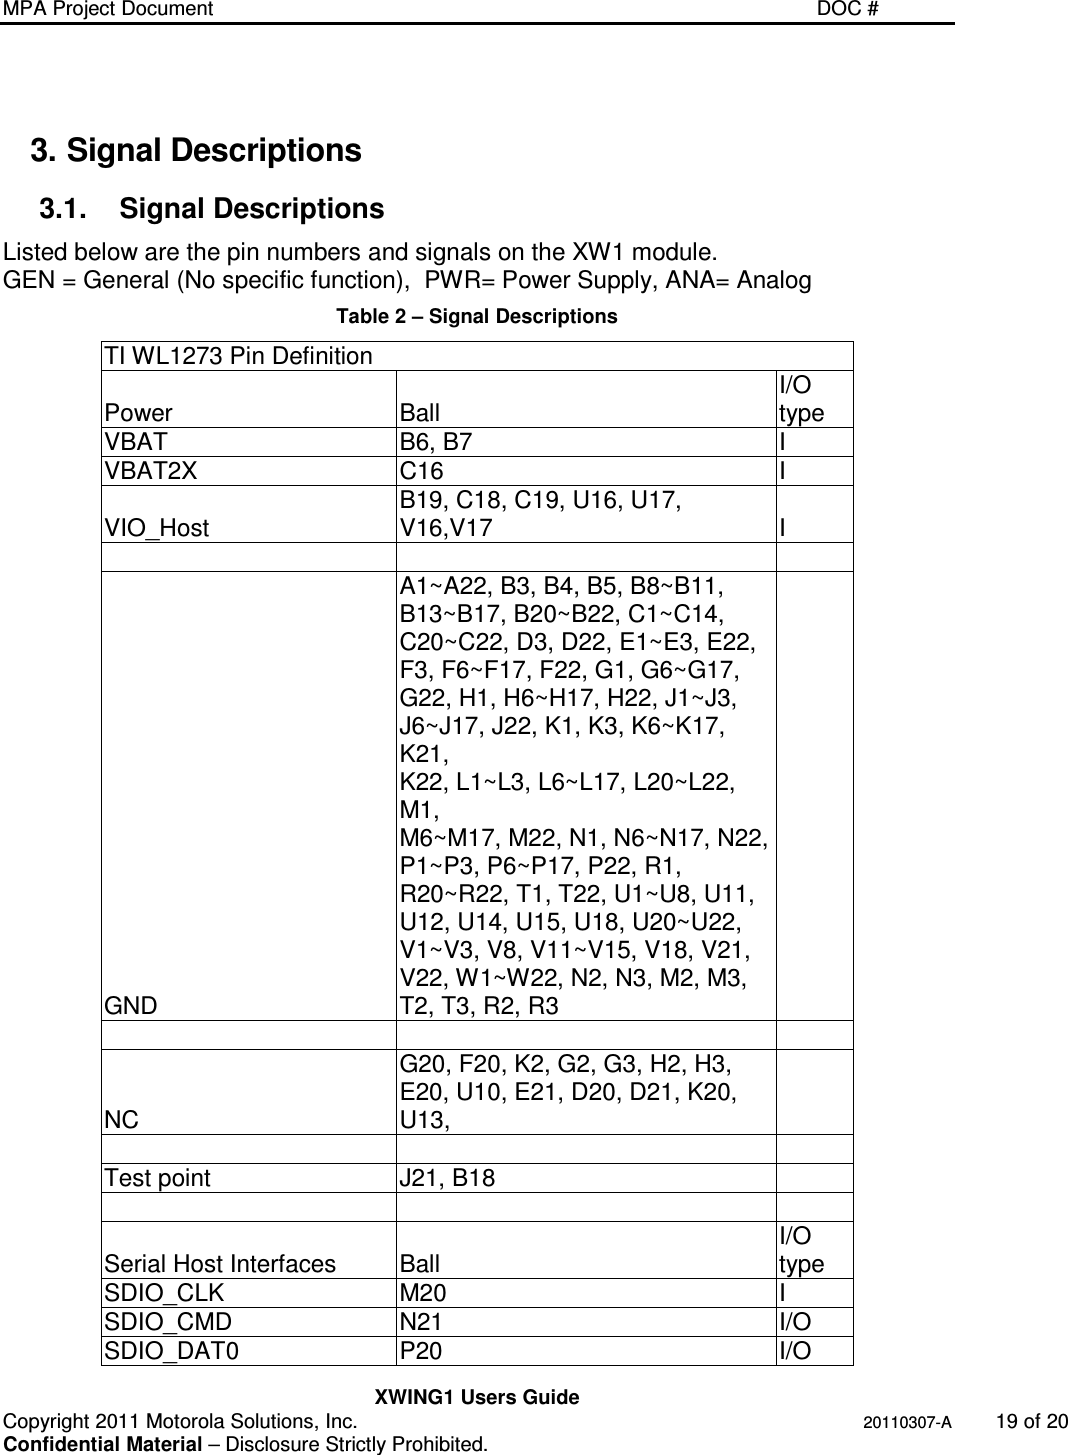 MPA Project Document   DOC #    XWING1 Users Guide Copyright 2011 Motorola Solutions, Inc.   20110307-A  19 of 20 Confidential Material – Disclosure Strictly Prohibited. 3. Signal Descriptions 3.1.  Signal Descriptions Listed below are the pin numbers and signals on the XW1 module. GEN = General (No specific function),  PWR= Power Supply, ANA= Analog Table 2 – Signal Descriptions TI WL1273 Pin Definition Power  Ball I/O type VBAT  B6, B7  I VBAT2X  C16  I VIO_Host B19, C18, C19, U16, U17, V16,V17  I      GND A1~A22, B3, B4, B5, B8~B11, B13~B17, B20~B22, C1~C14, C20~C22, D3, D22, E1~E3, E22, F3, F6~F17, F22, G1, G6~G17, G22, H1, H6~H17, H22, J1~J3, J6~J17, J22, K1, K3, K6~K17, K21, K22, L1~L3, L6~L17, L20~L22, M1, M6~M17, M22, N1, N6~N17, N22, P1~P3, P6~P17, P22, R1, R20~R22, T1, T22, U1~U8, U11, U12, U14, U15, U18, U20~U22, V1~V3, V8, V11~V15, V18, V21, V22, W1~W22, N2, N3, M2, M3, T2, T3, R2, R3        NC G20, F20, K2, G2, G3, H2, H3, E20, U10, E21, D20, D21, K20, U13,         Test point  J21, B18        Serial Host Interfaces  Ball I/O type SDIO_CLK  M20  I SDIO_CMD  N21  I/O SDIO_DAT0  P20  I/O 